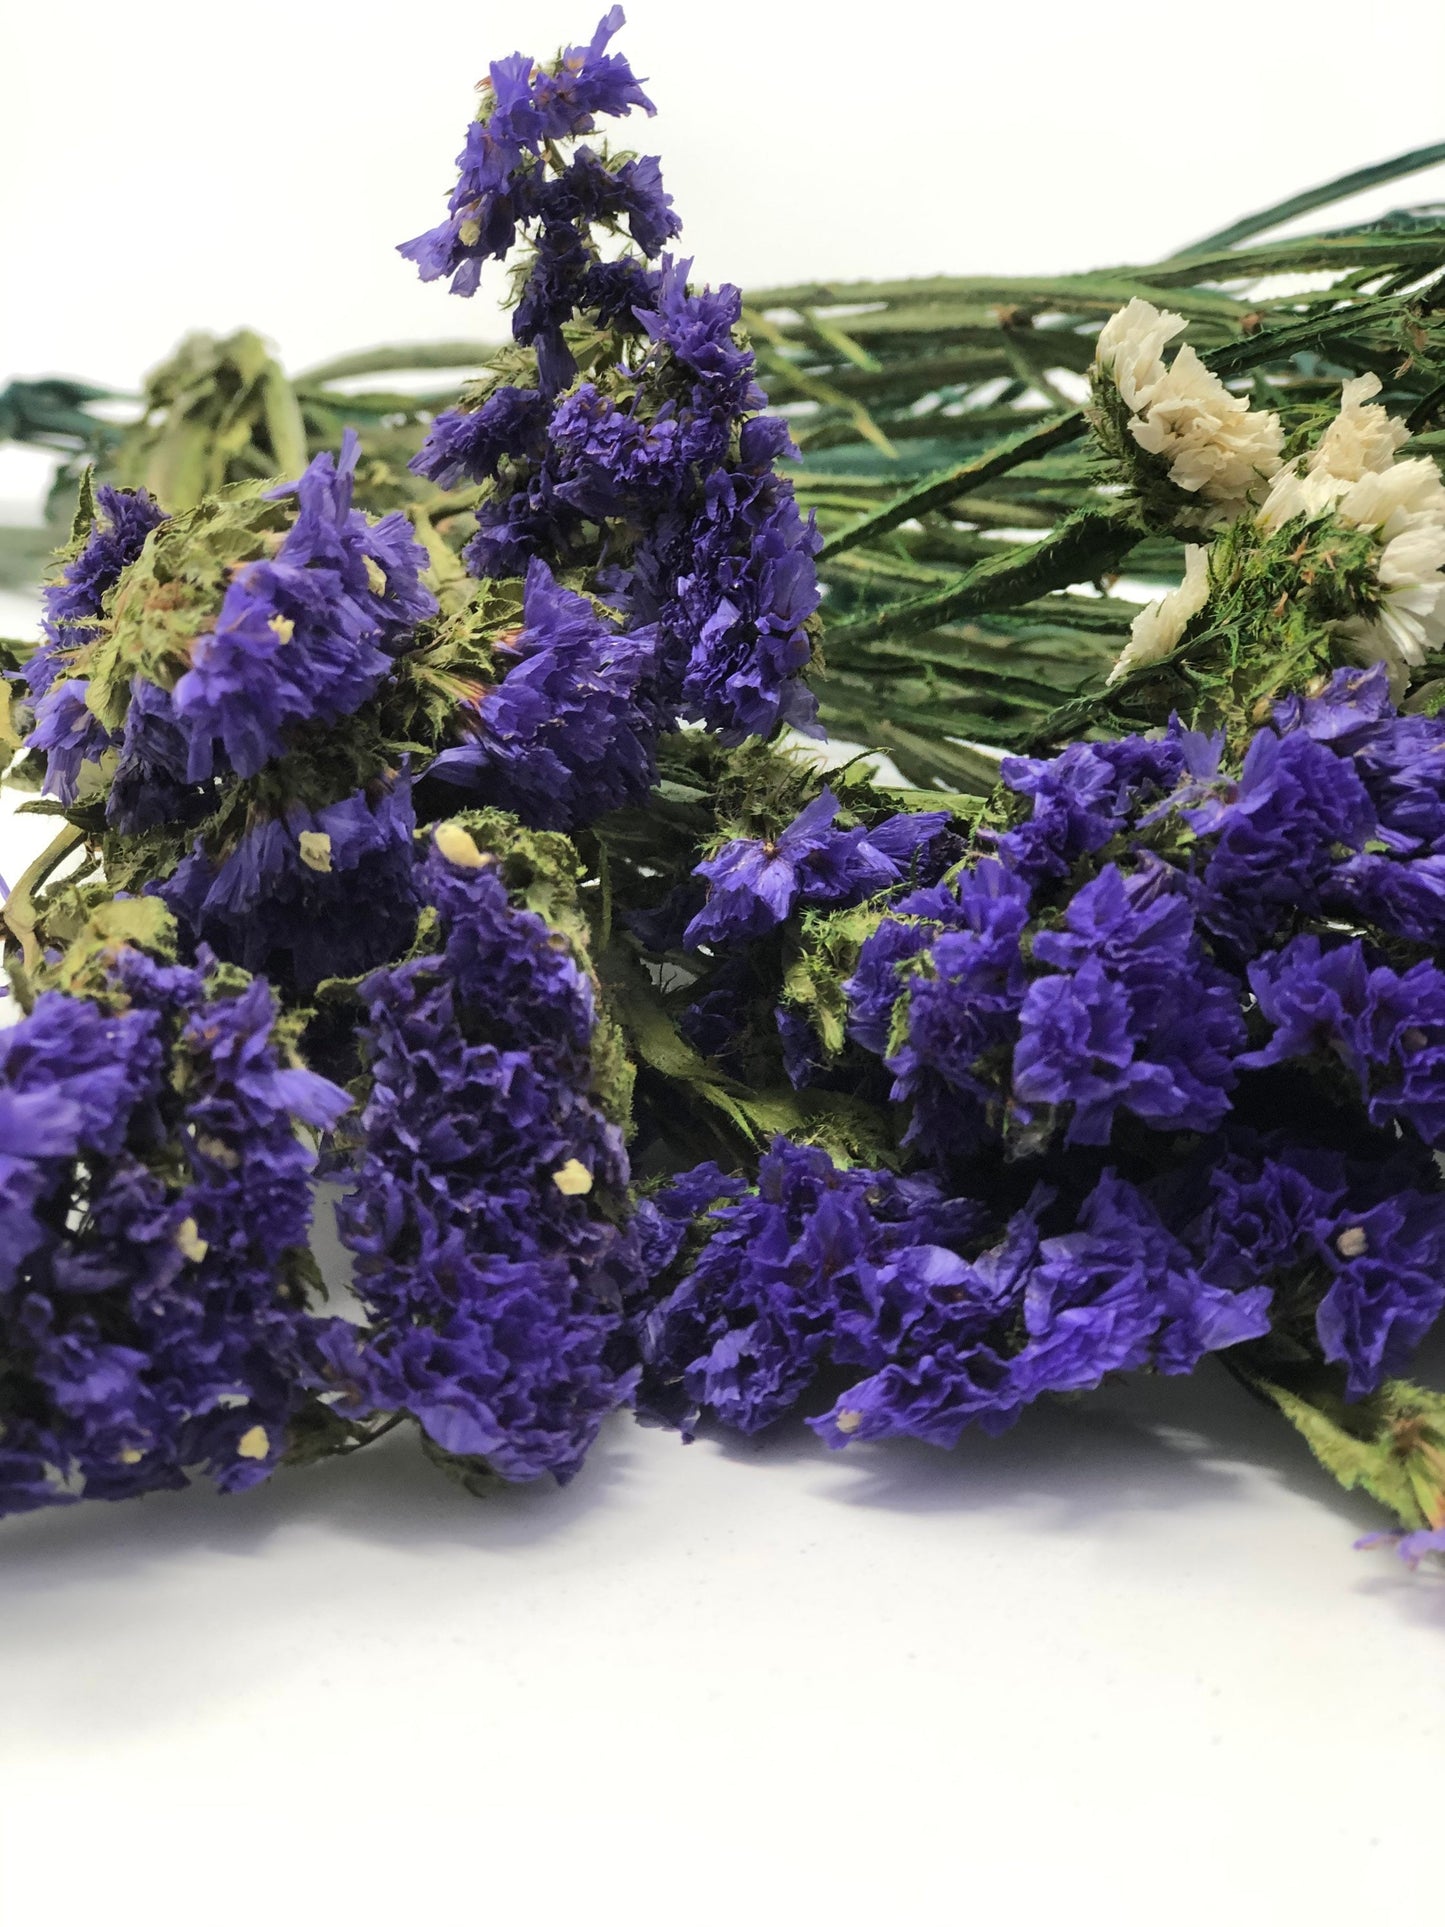 Sinuata Statice, Limonium Sinuatum, Pink, Rose, Blue Statice, Blue, White, Dried, Preserved Flowers Real Flowers Wedding Flowers Bouquet